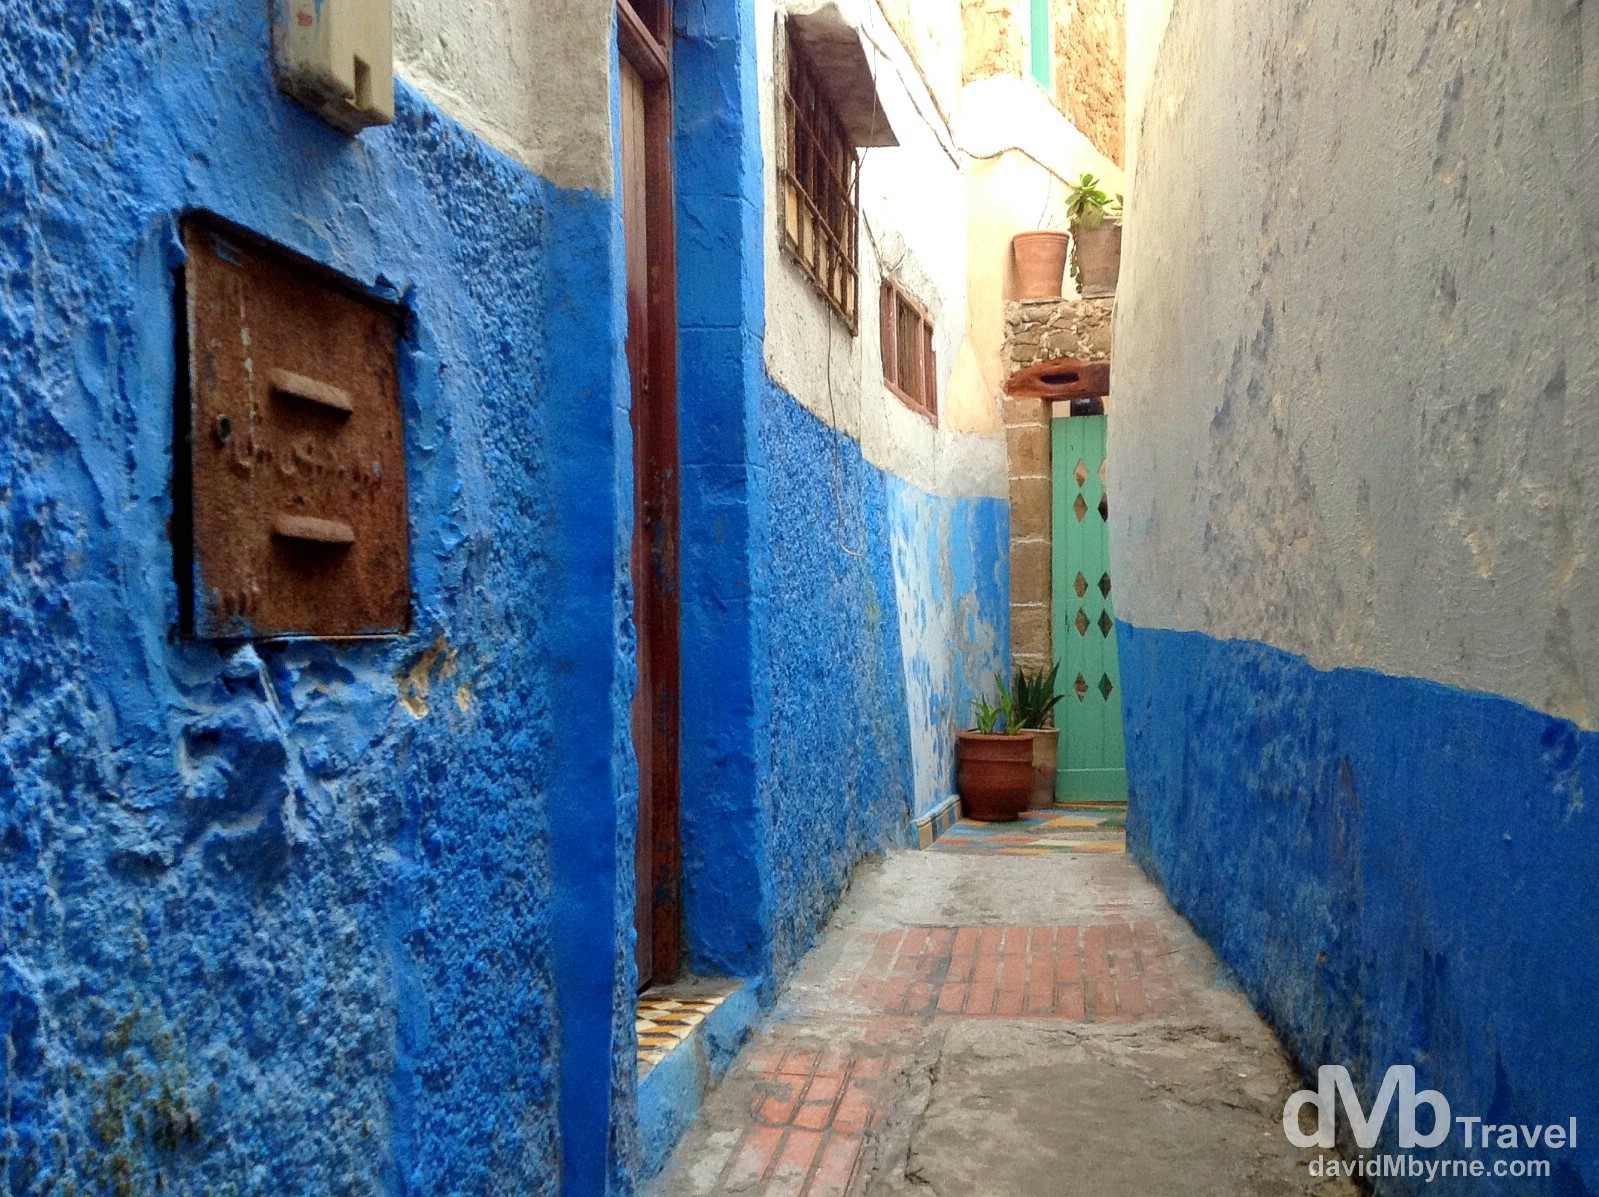 Tight residential lane in the medina of Essaouira, Morocco. May 2nd, 2014.